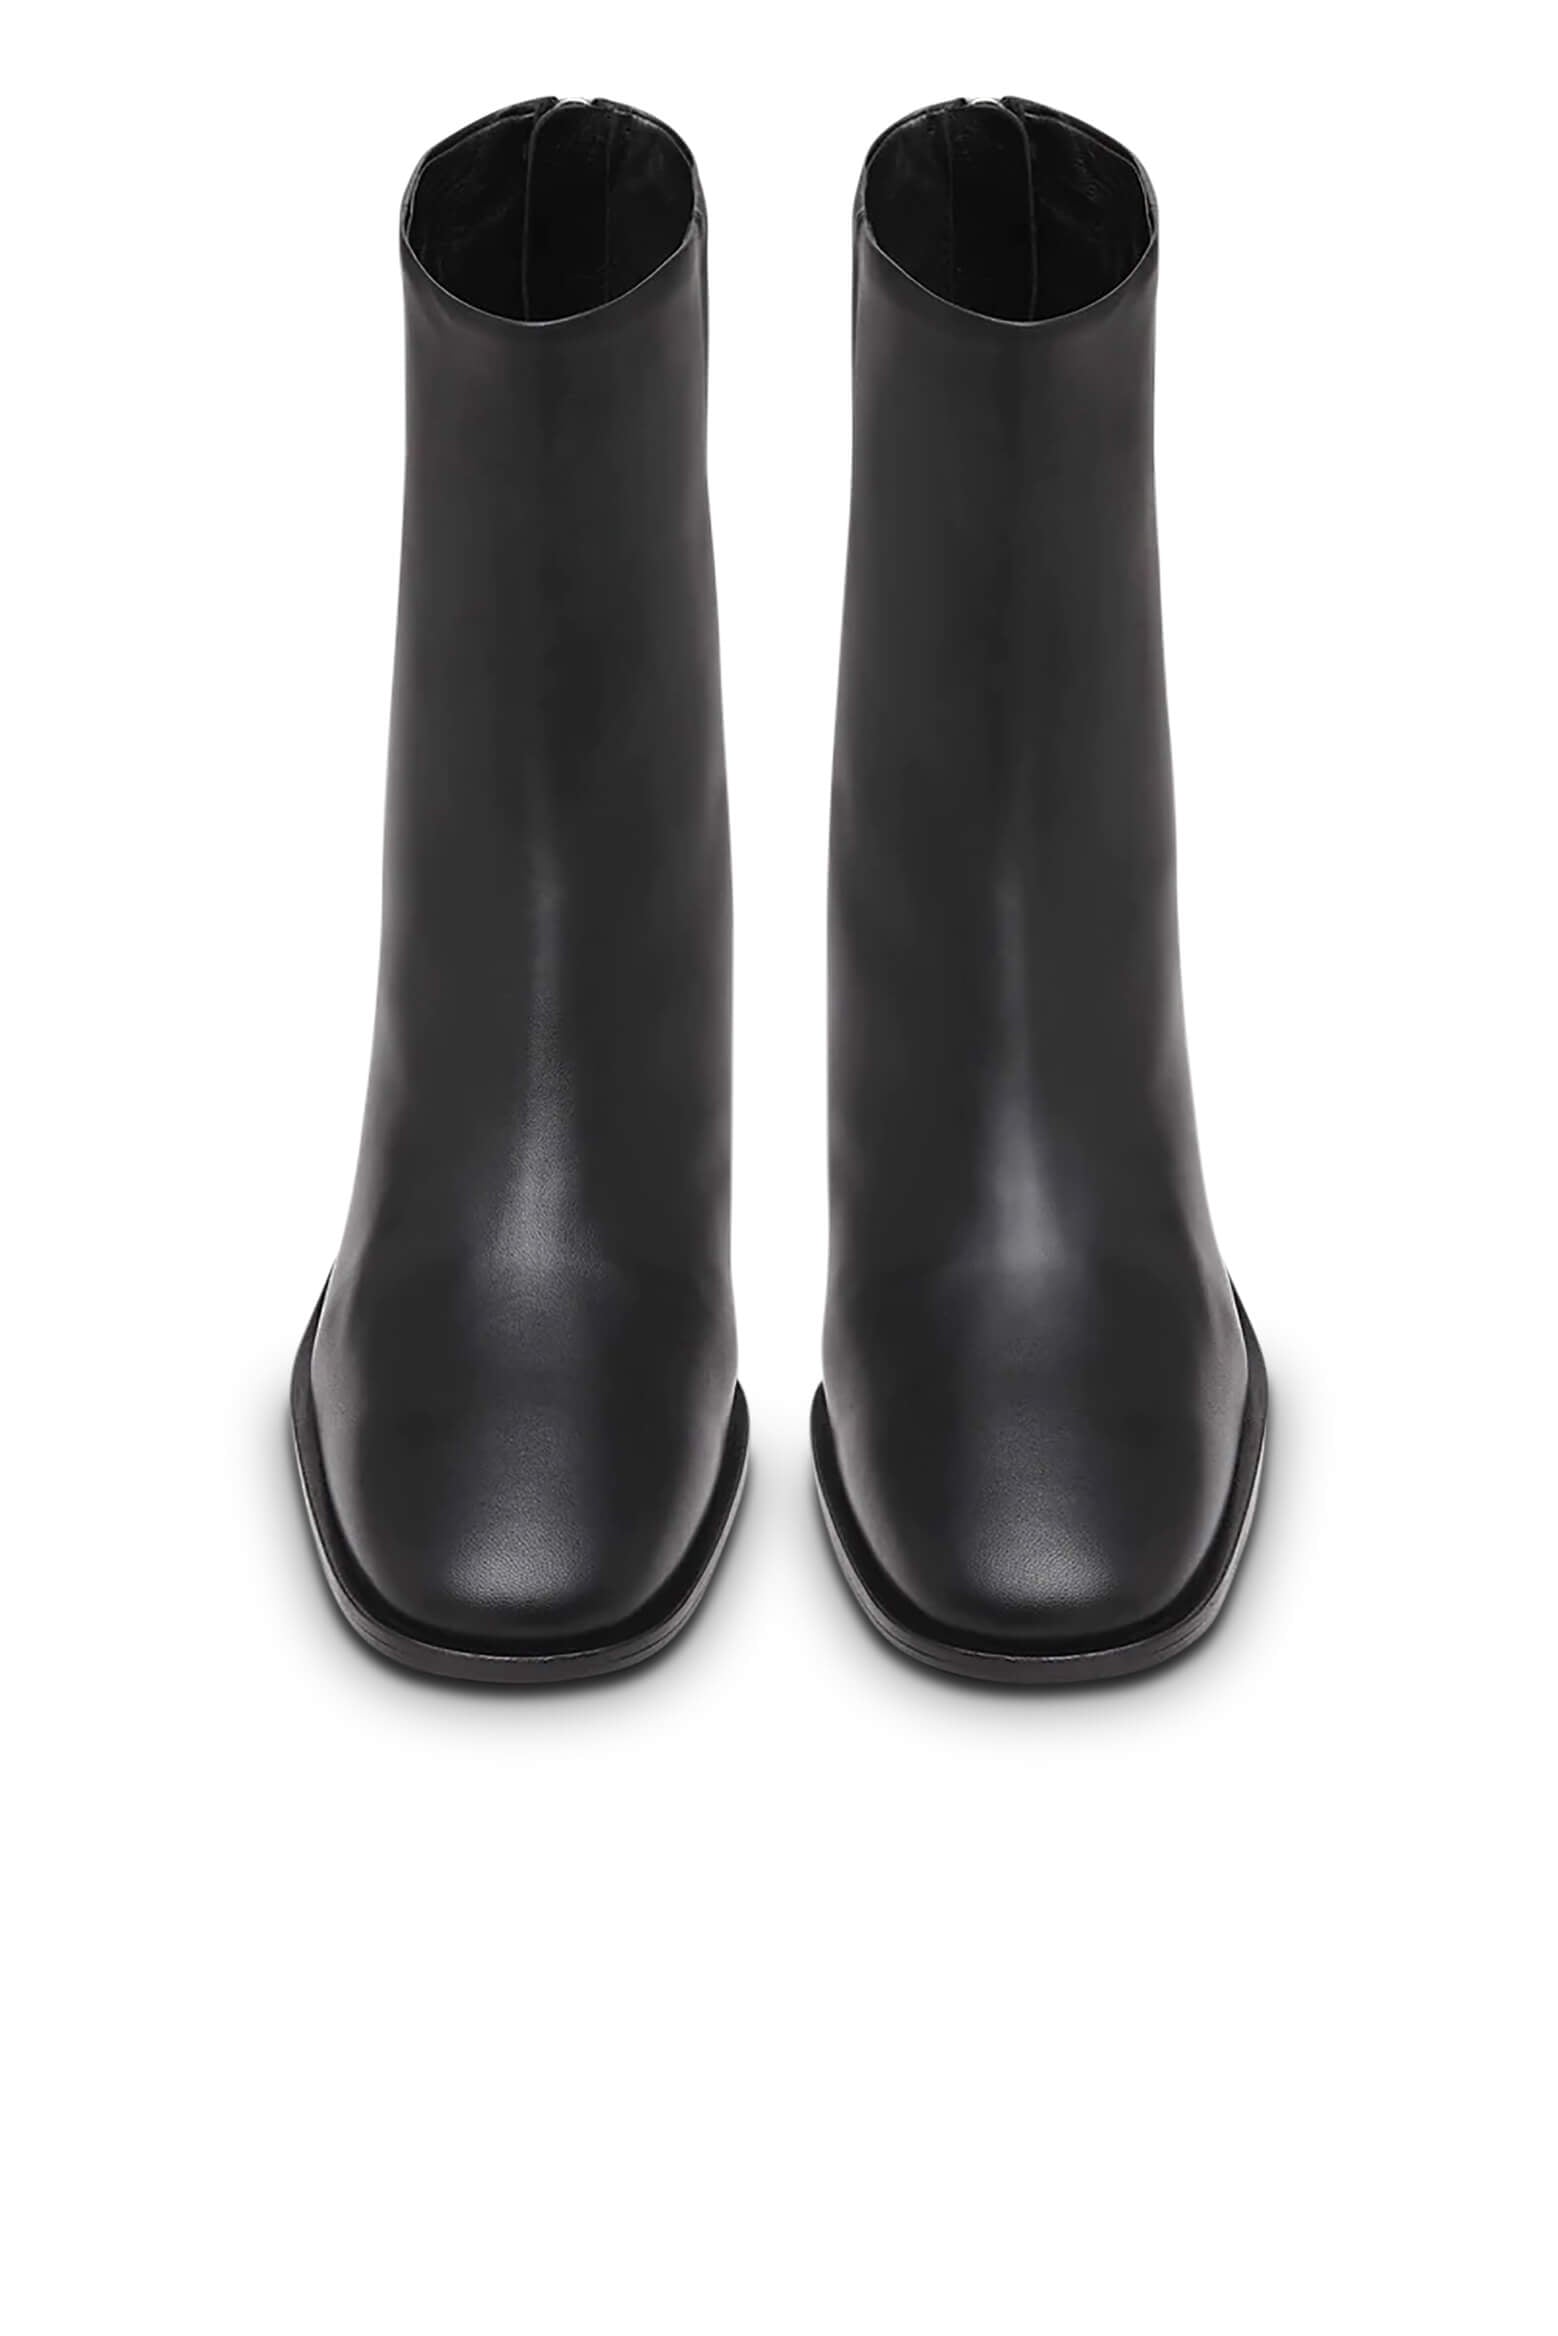 A.Emery Soma Leather Boots in Black from The New Trend